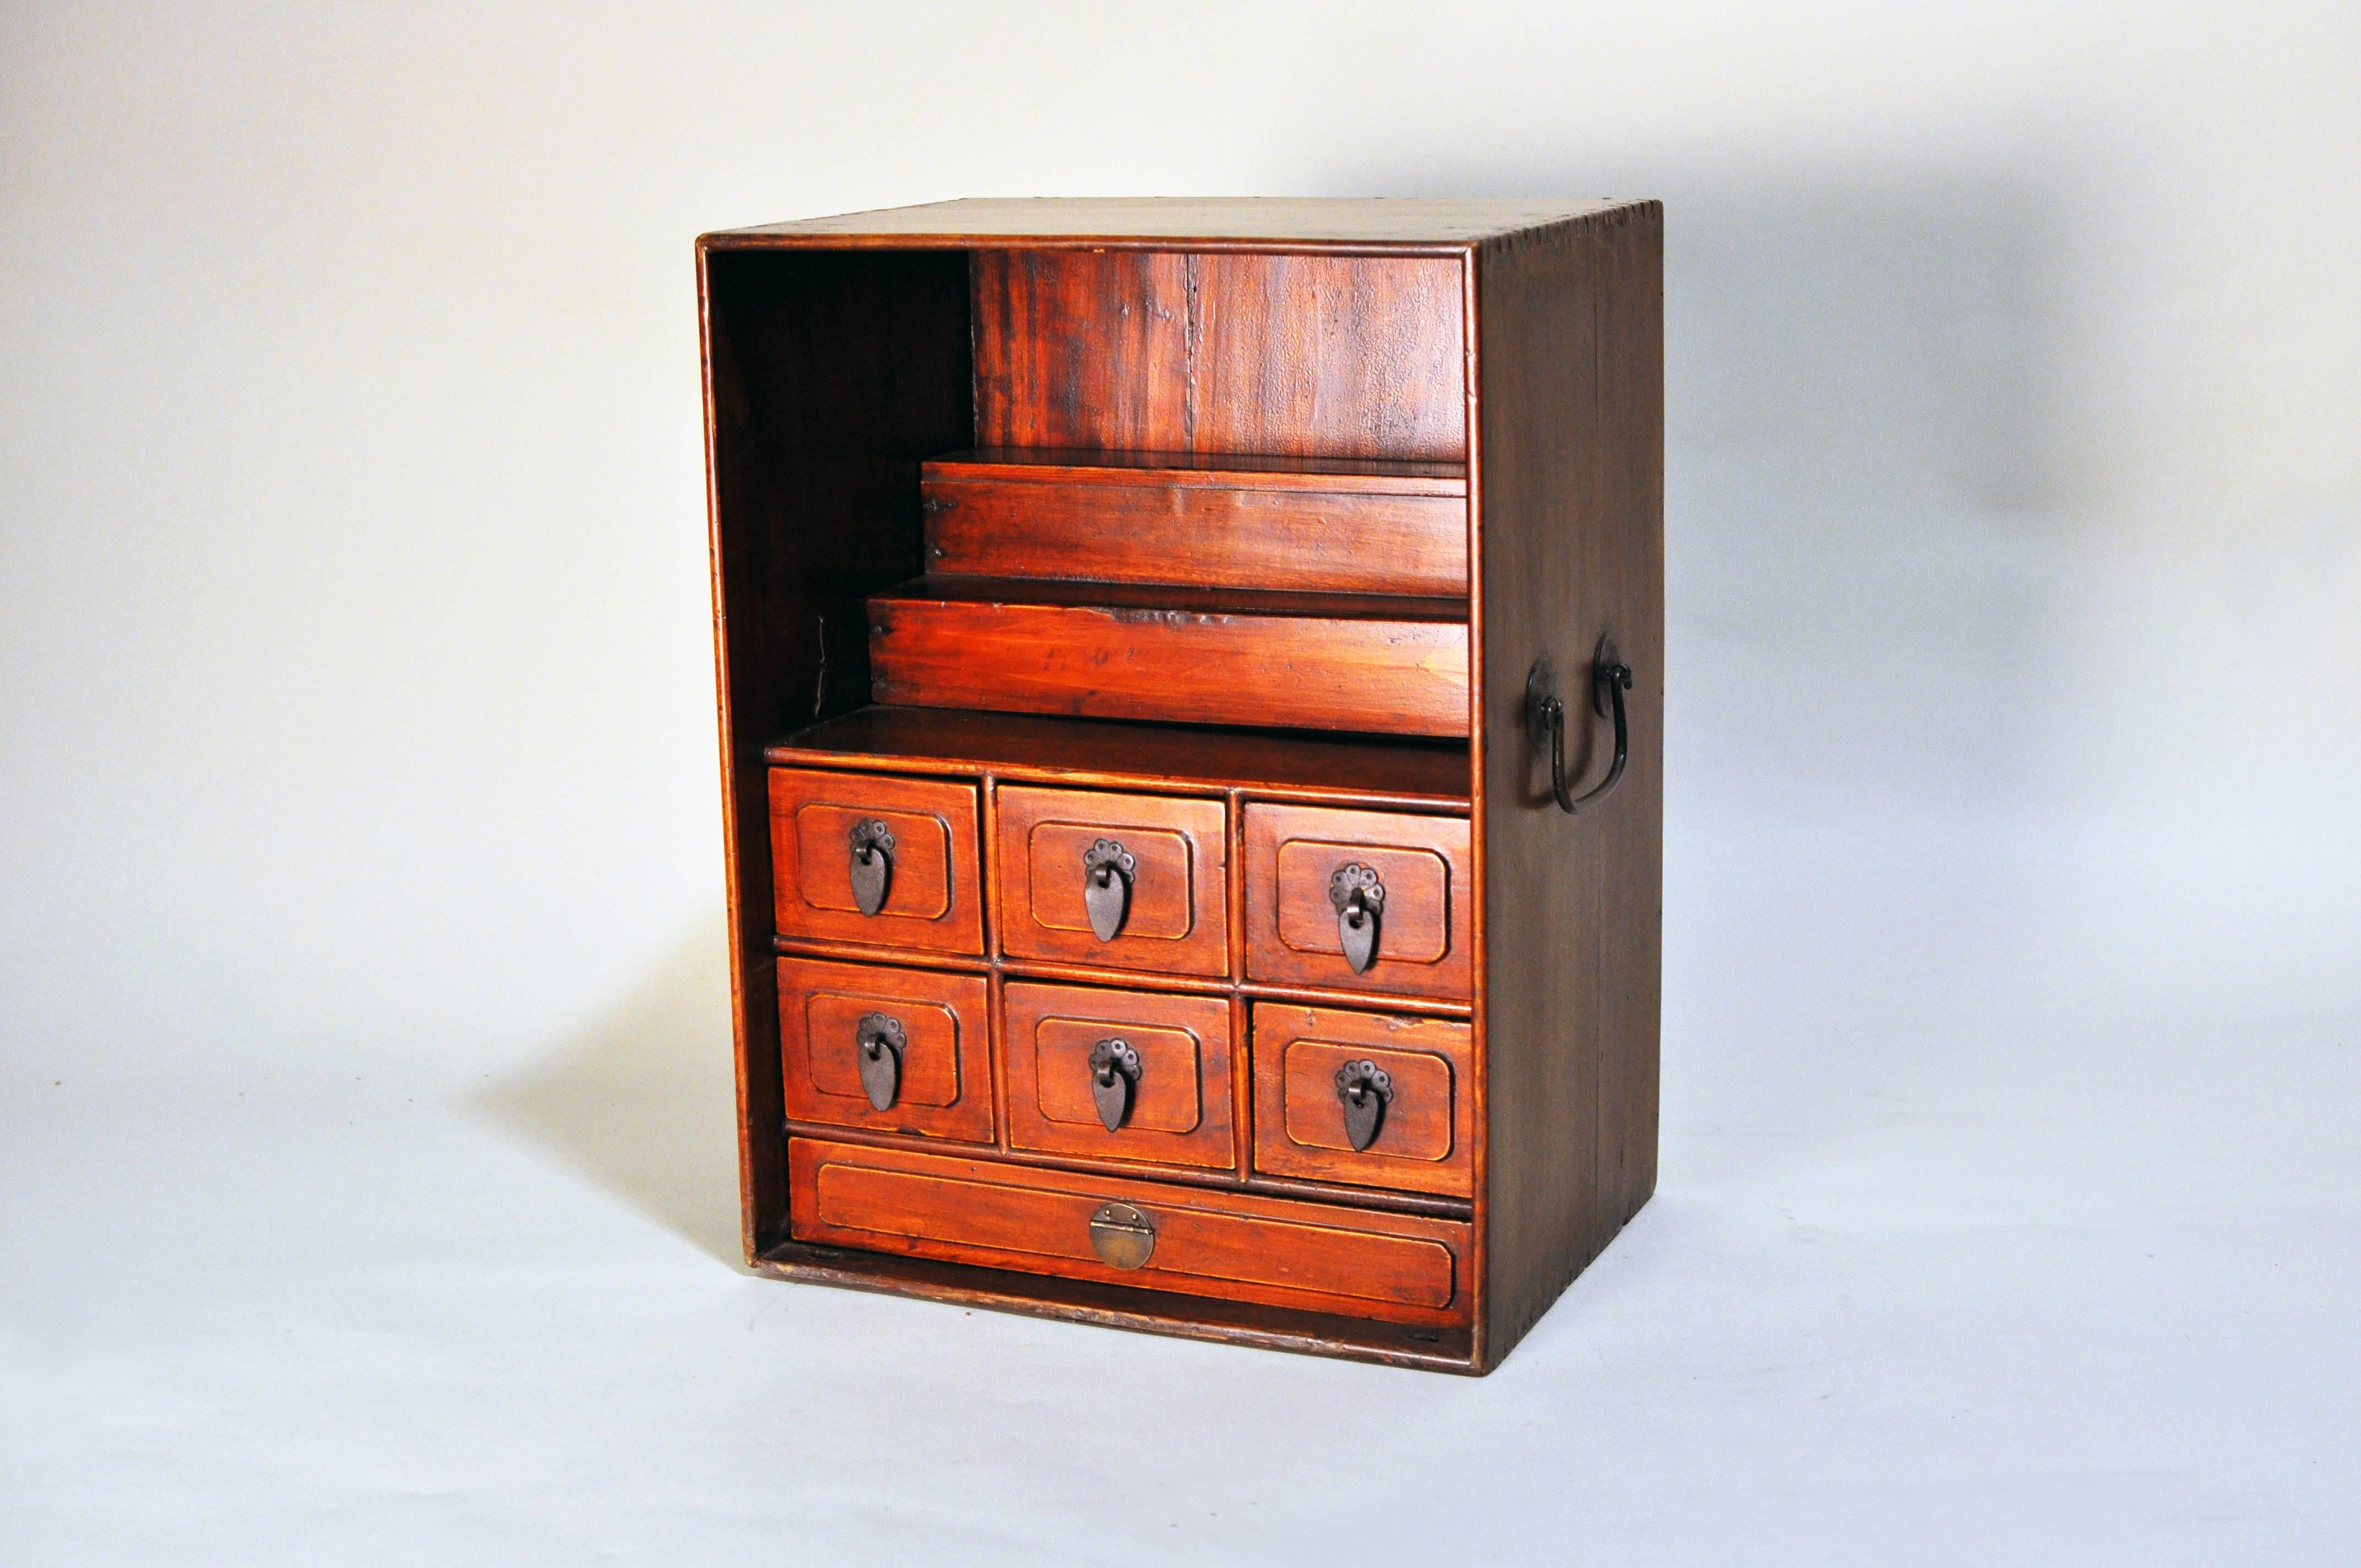 This petite box features a stepped display raised above six smaller drawers, which would have held writing implements such as pens, brushes, inks, wax and seal presses, while the larger fitted drawer at the base was used to store paper.